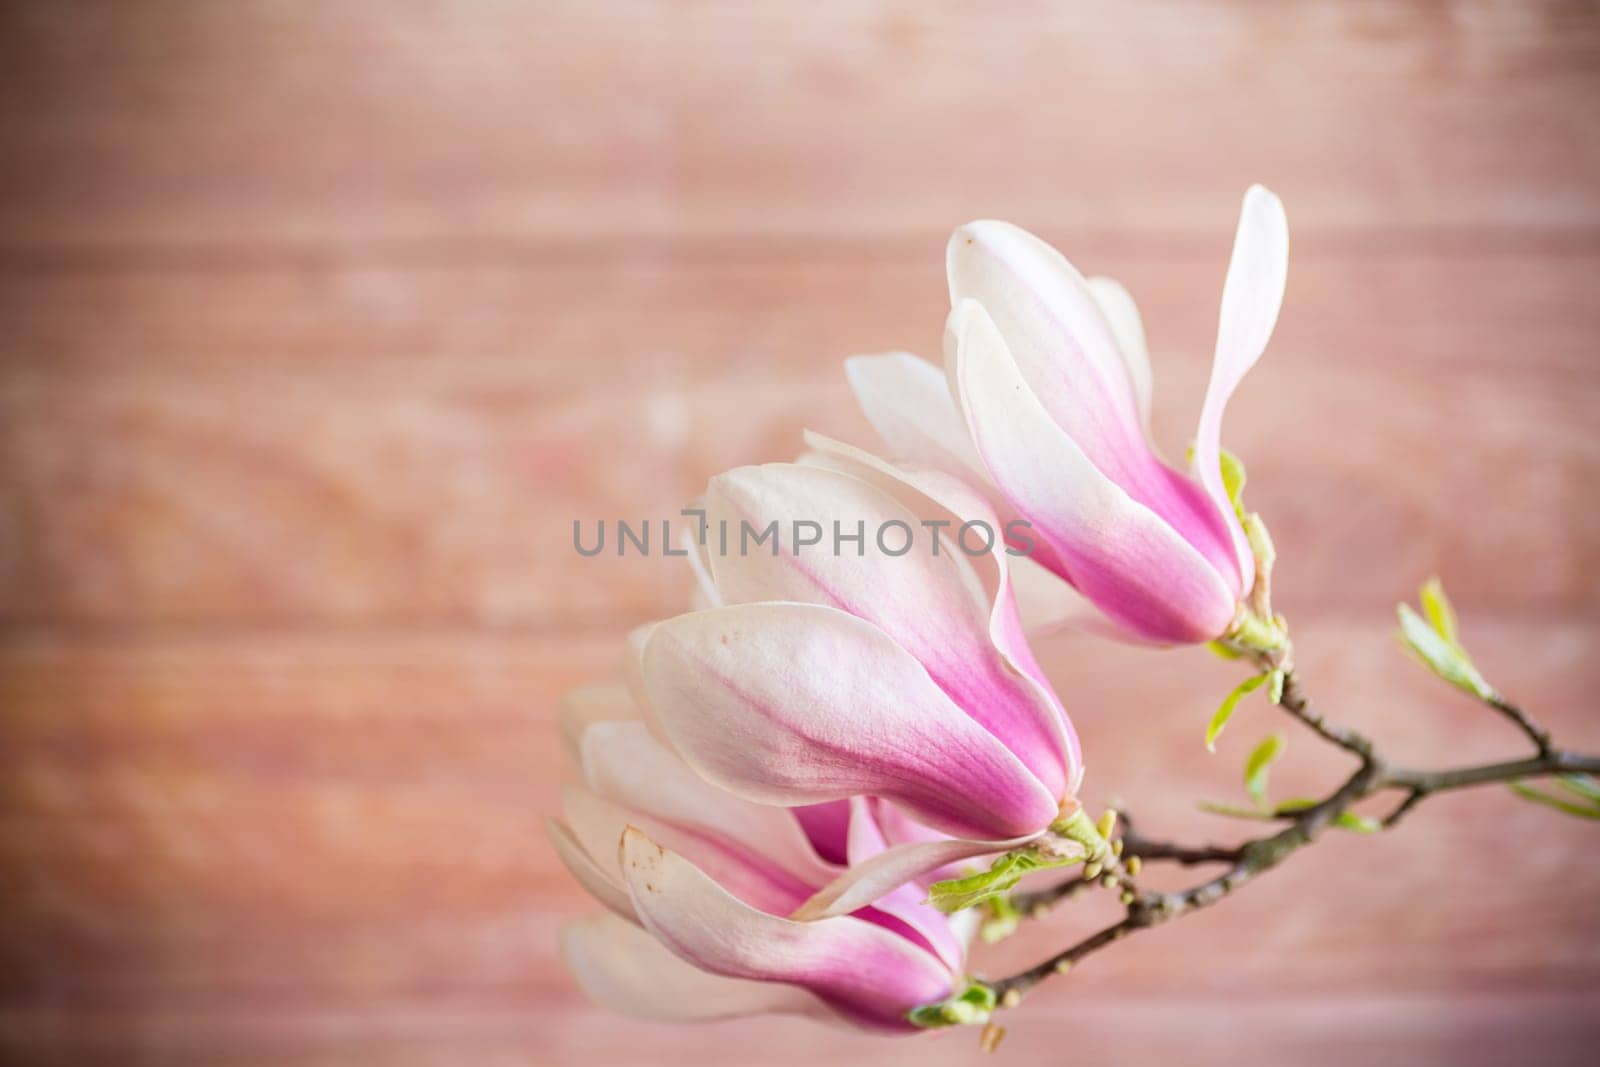 Branch with blooming pink Magnolia flowers on blurred wooden background